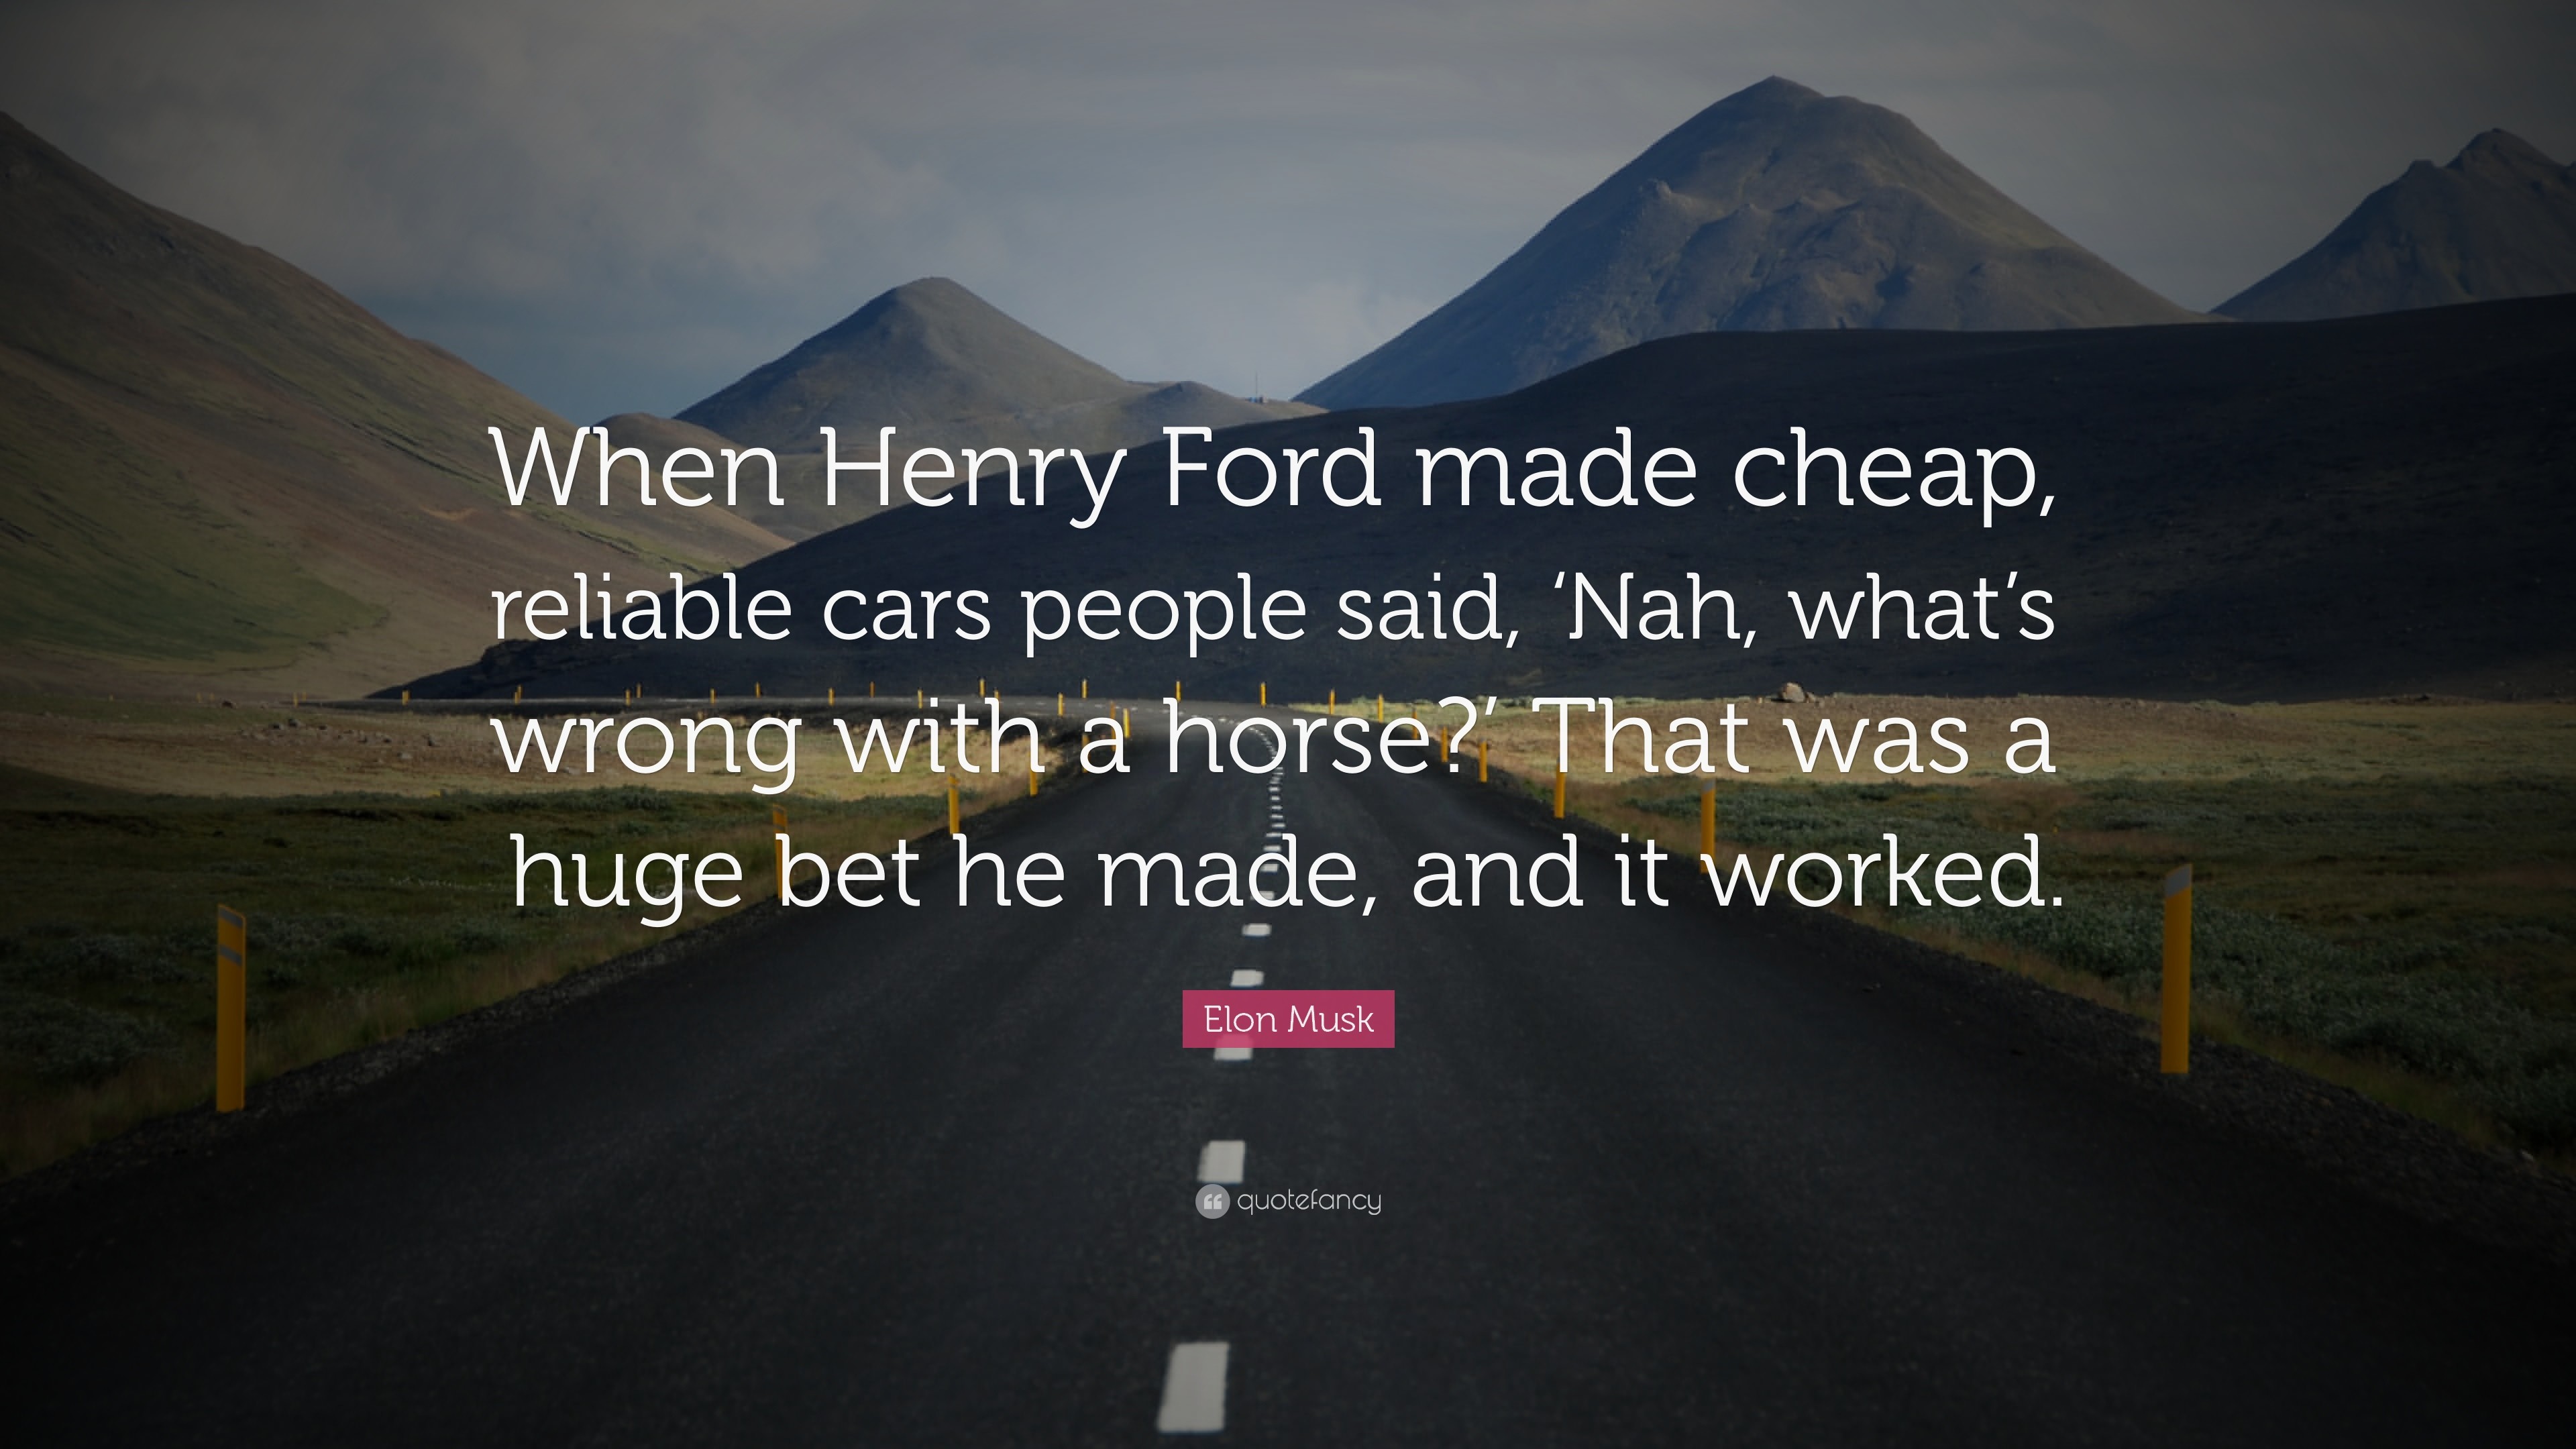 Elon Musk Quote When Henry Ford made cheap, reliable cars people said,